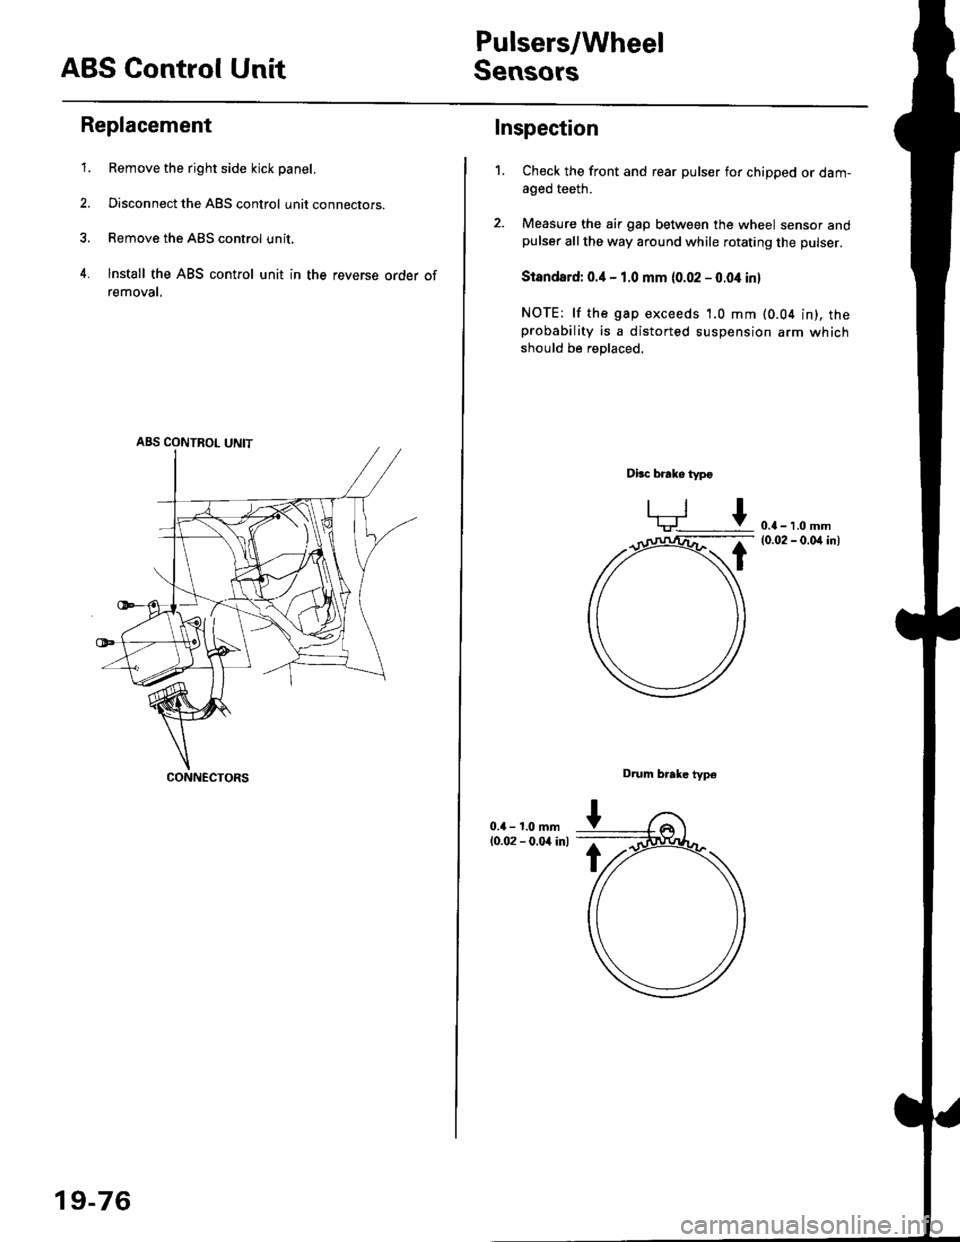 HONDA CIVIC 1999 6.G Workshop Manual ABS Control Unit
Pulsers/Wheel
Sensors
Replacement
1. Remove the right side kick panel.
2. Disconnect the ABS control unit connecrors.
3. Remove the ABS control unit,
4. lnstall the ABS control unit i